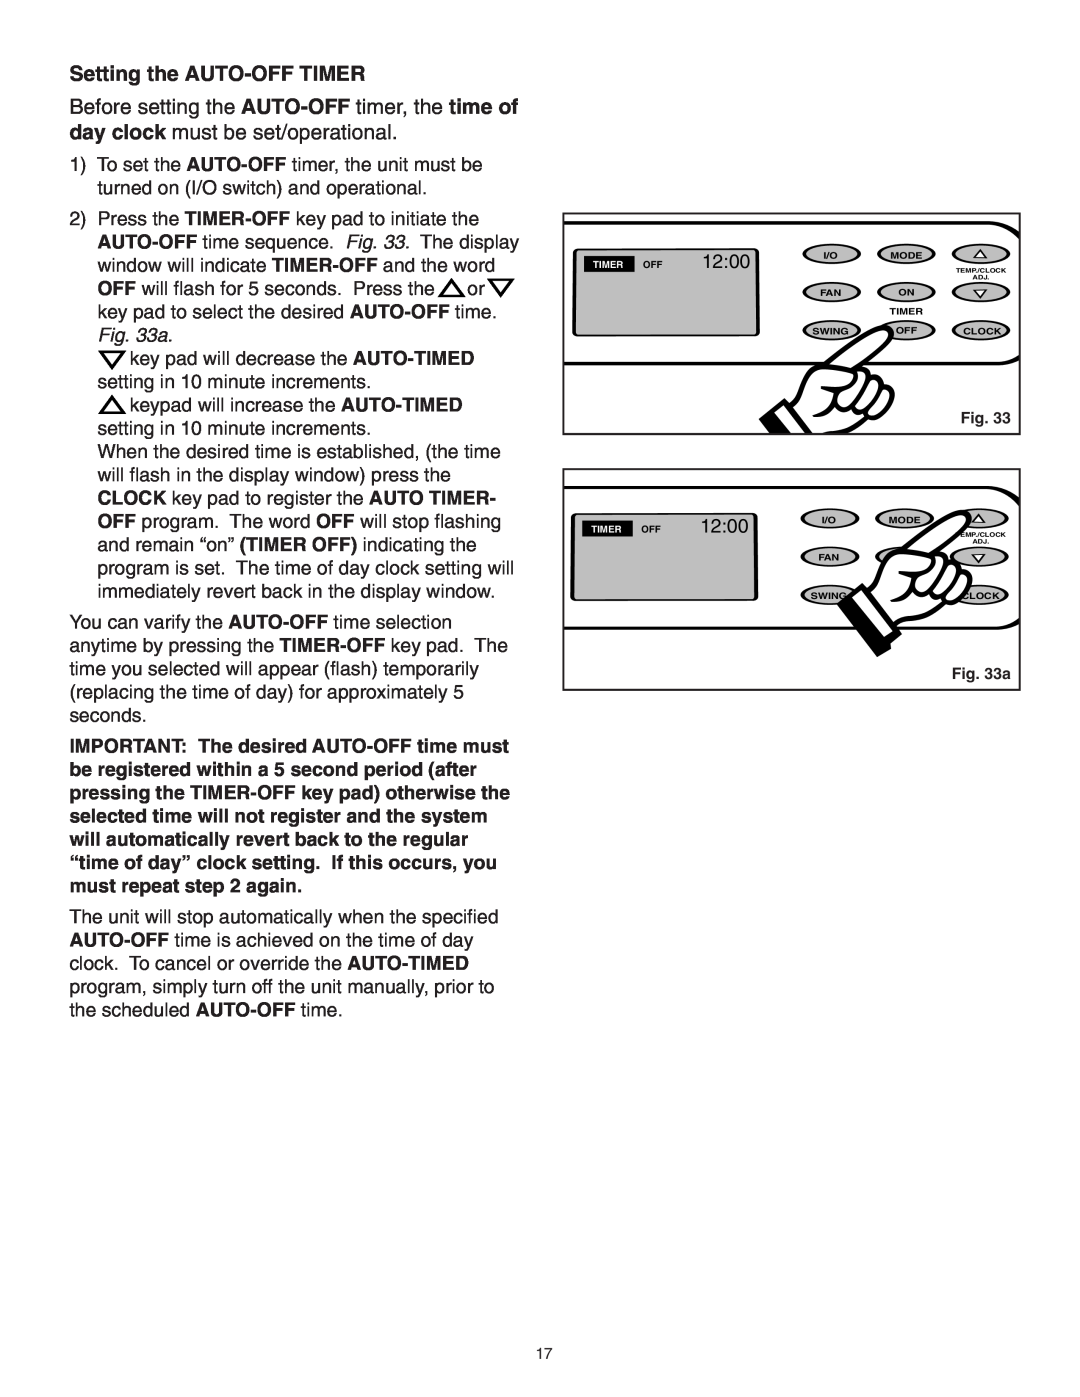 Danby SPAC8499 manual Setting the AUTO-OFFTIMER 